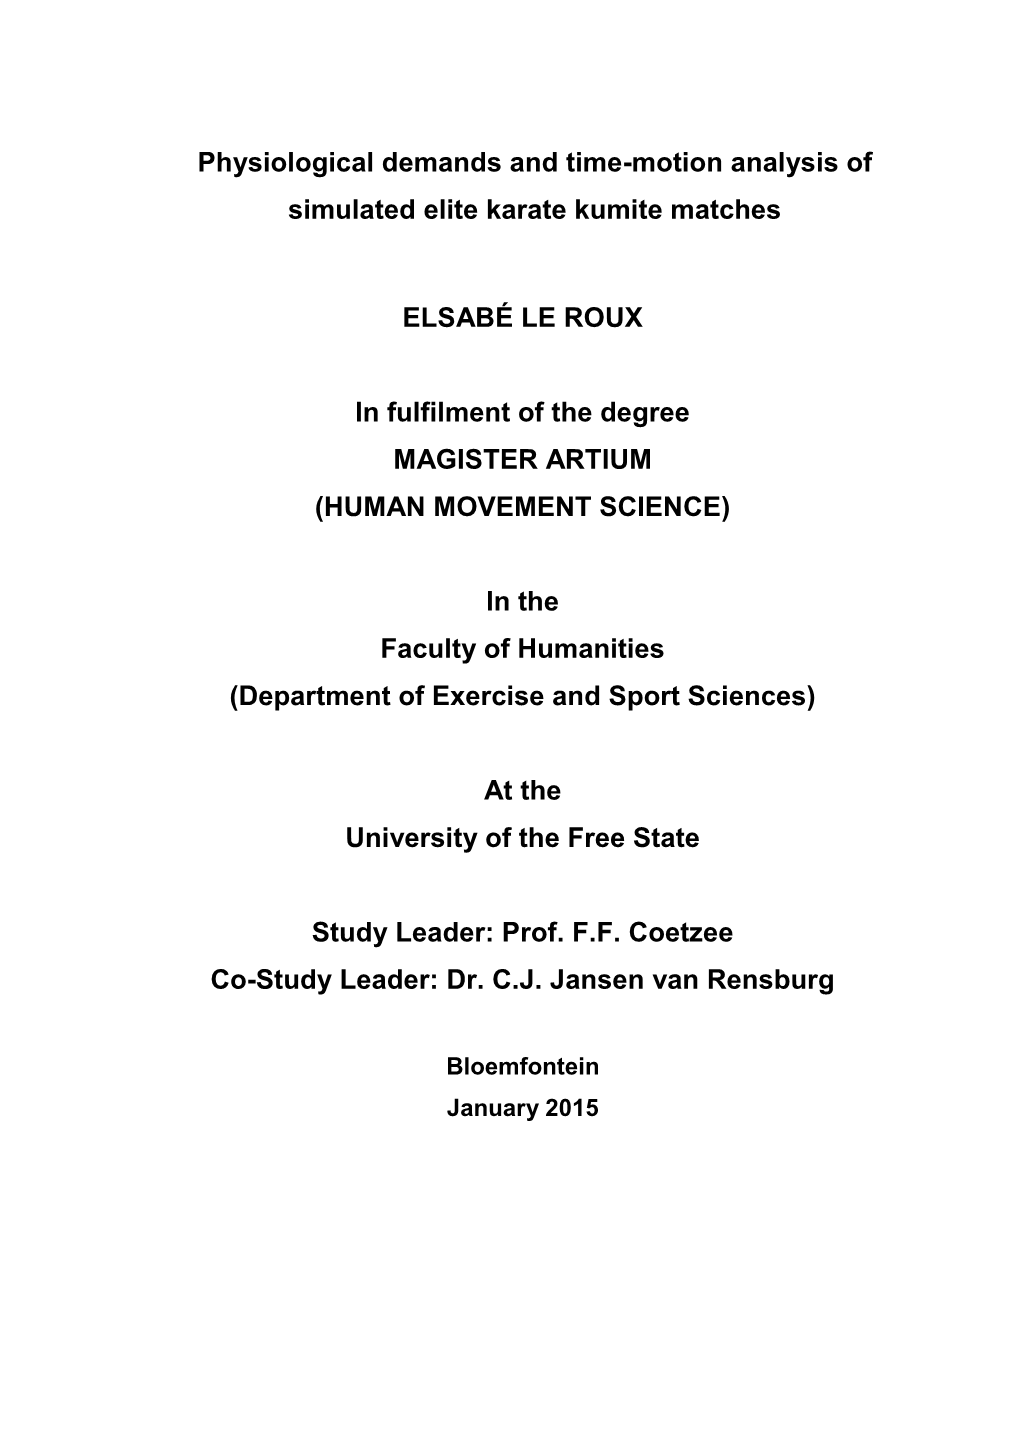 Physiological Demands and Time-Motion Analysis of Simulated Elite Karate Kumite Matches